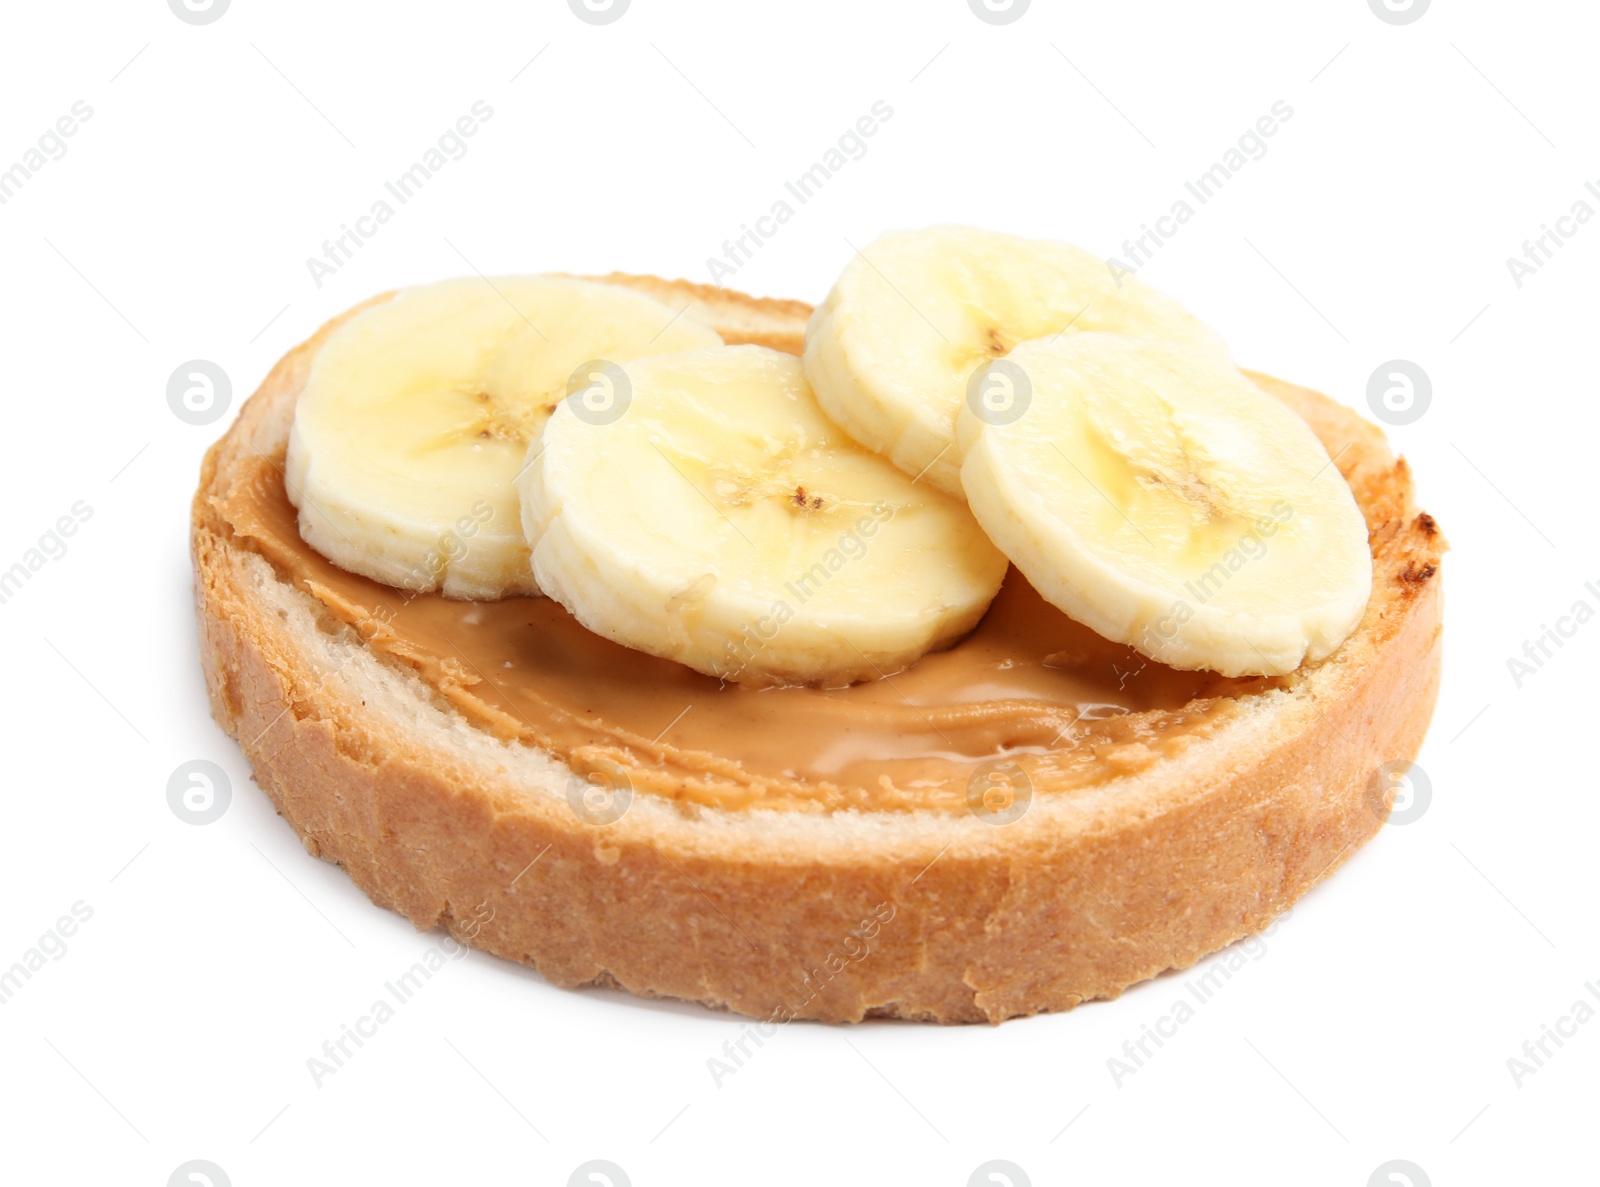 Photo of Slice of bread with peanut butter and banana on white background